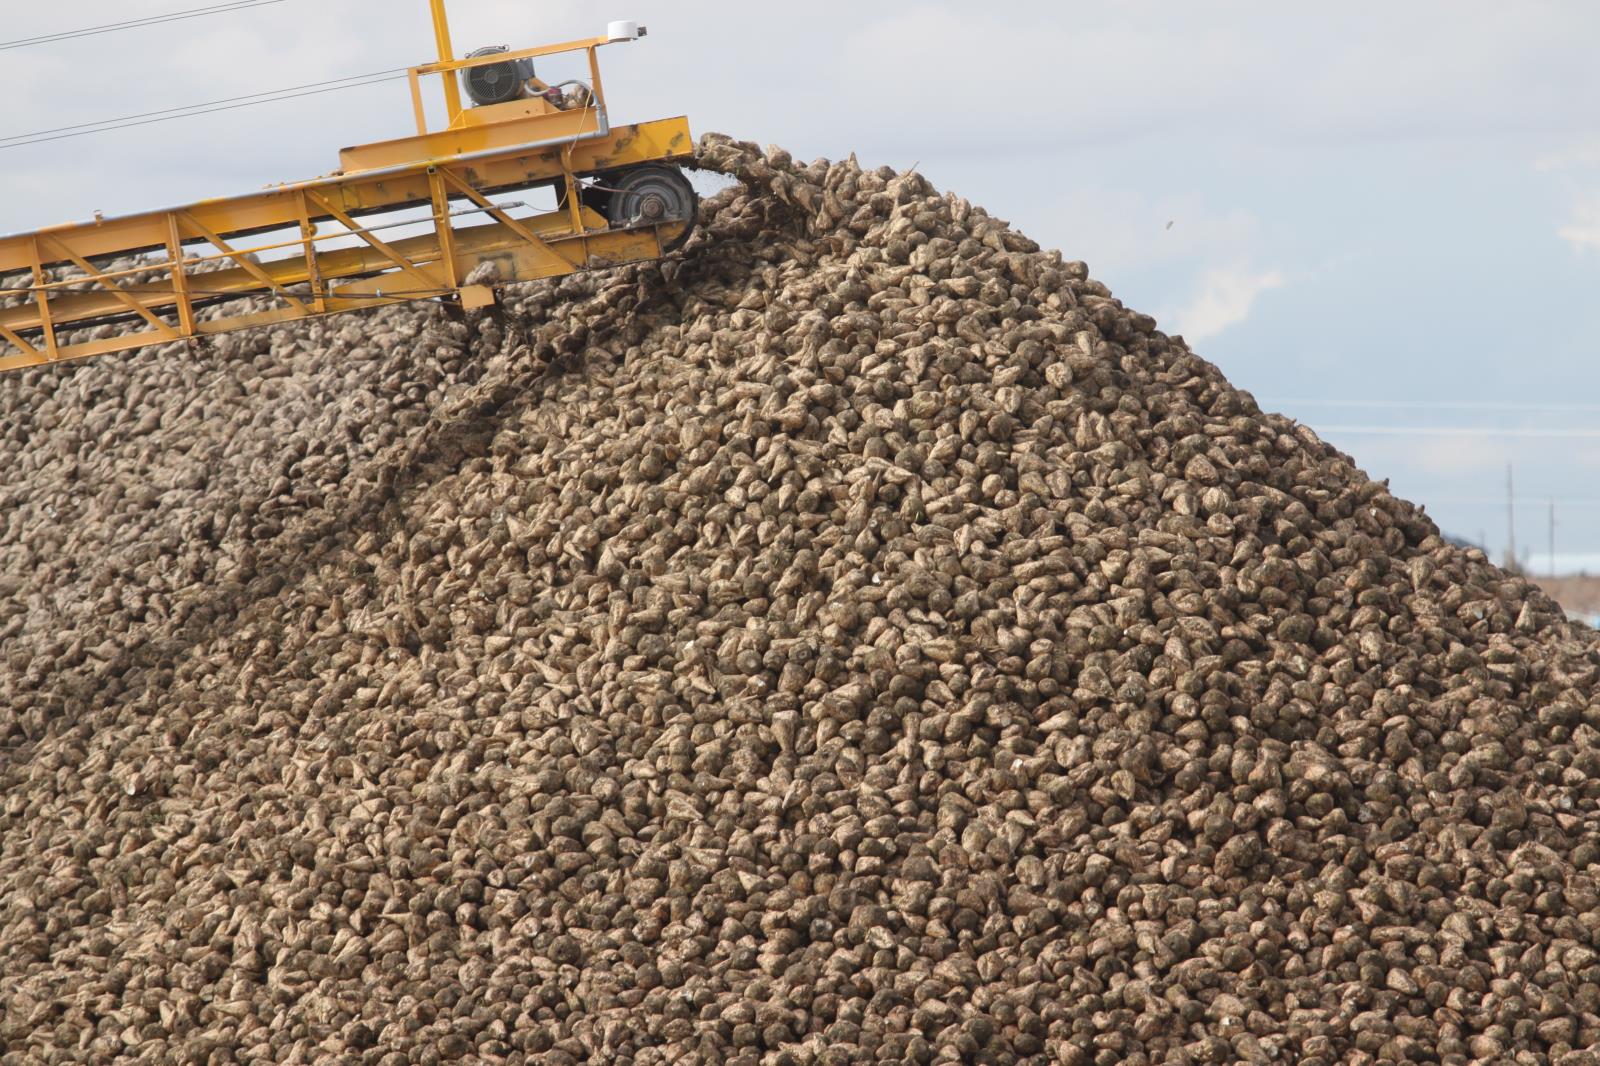 Idaho sugar beet growers are reporting good yields and sugar content so far during this year’s harvest. Idaho farmers grow about 170,000 acres of sugar beets each year. 